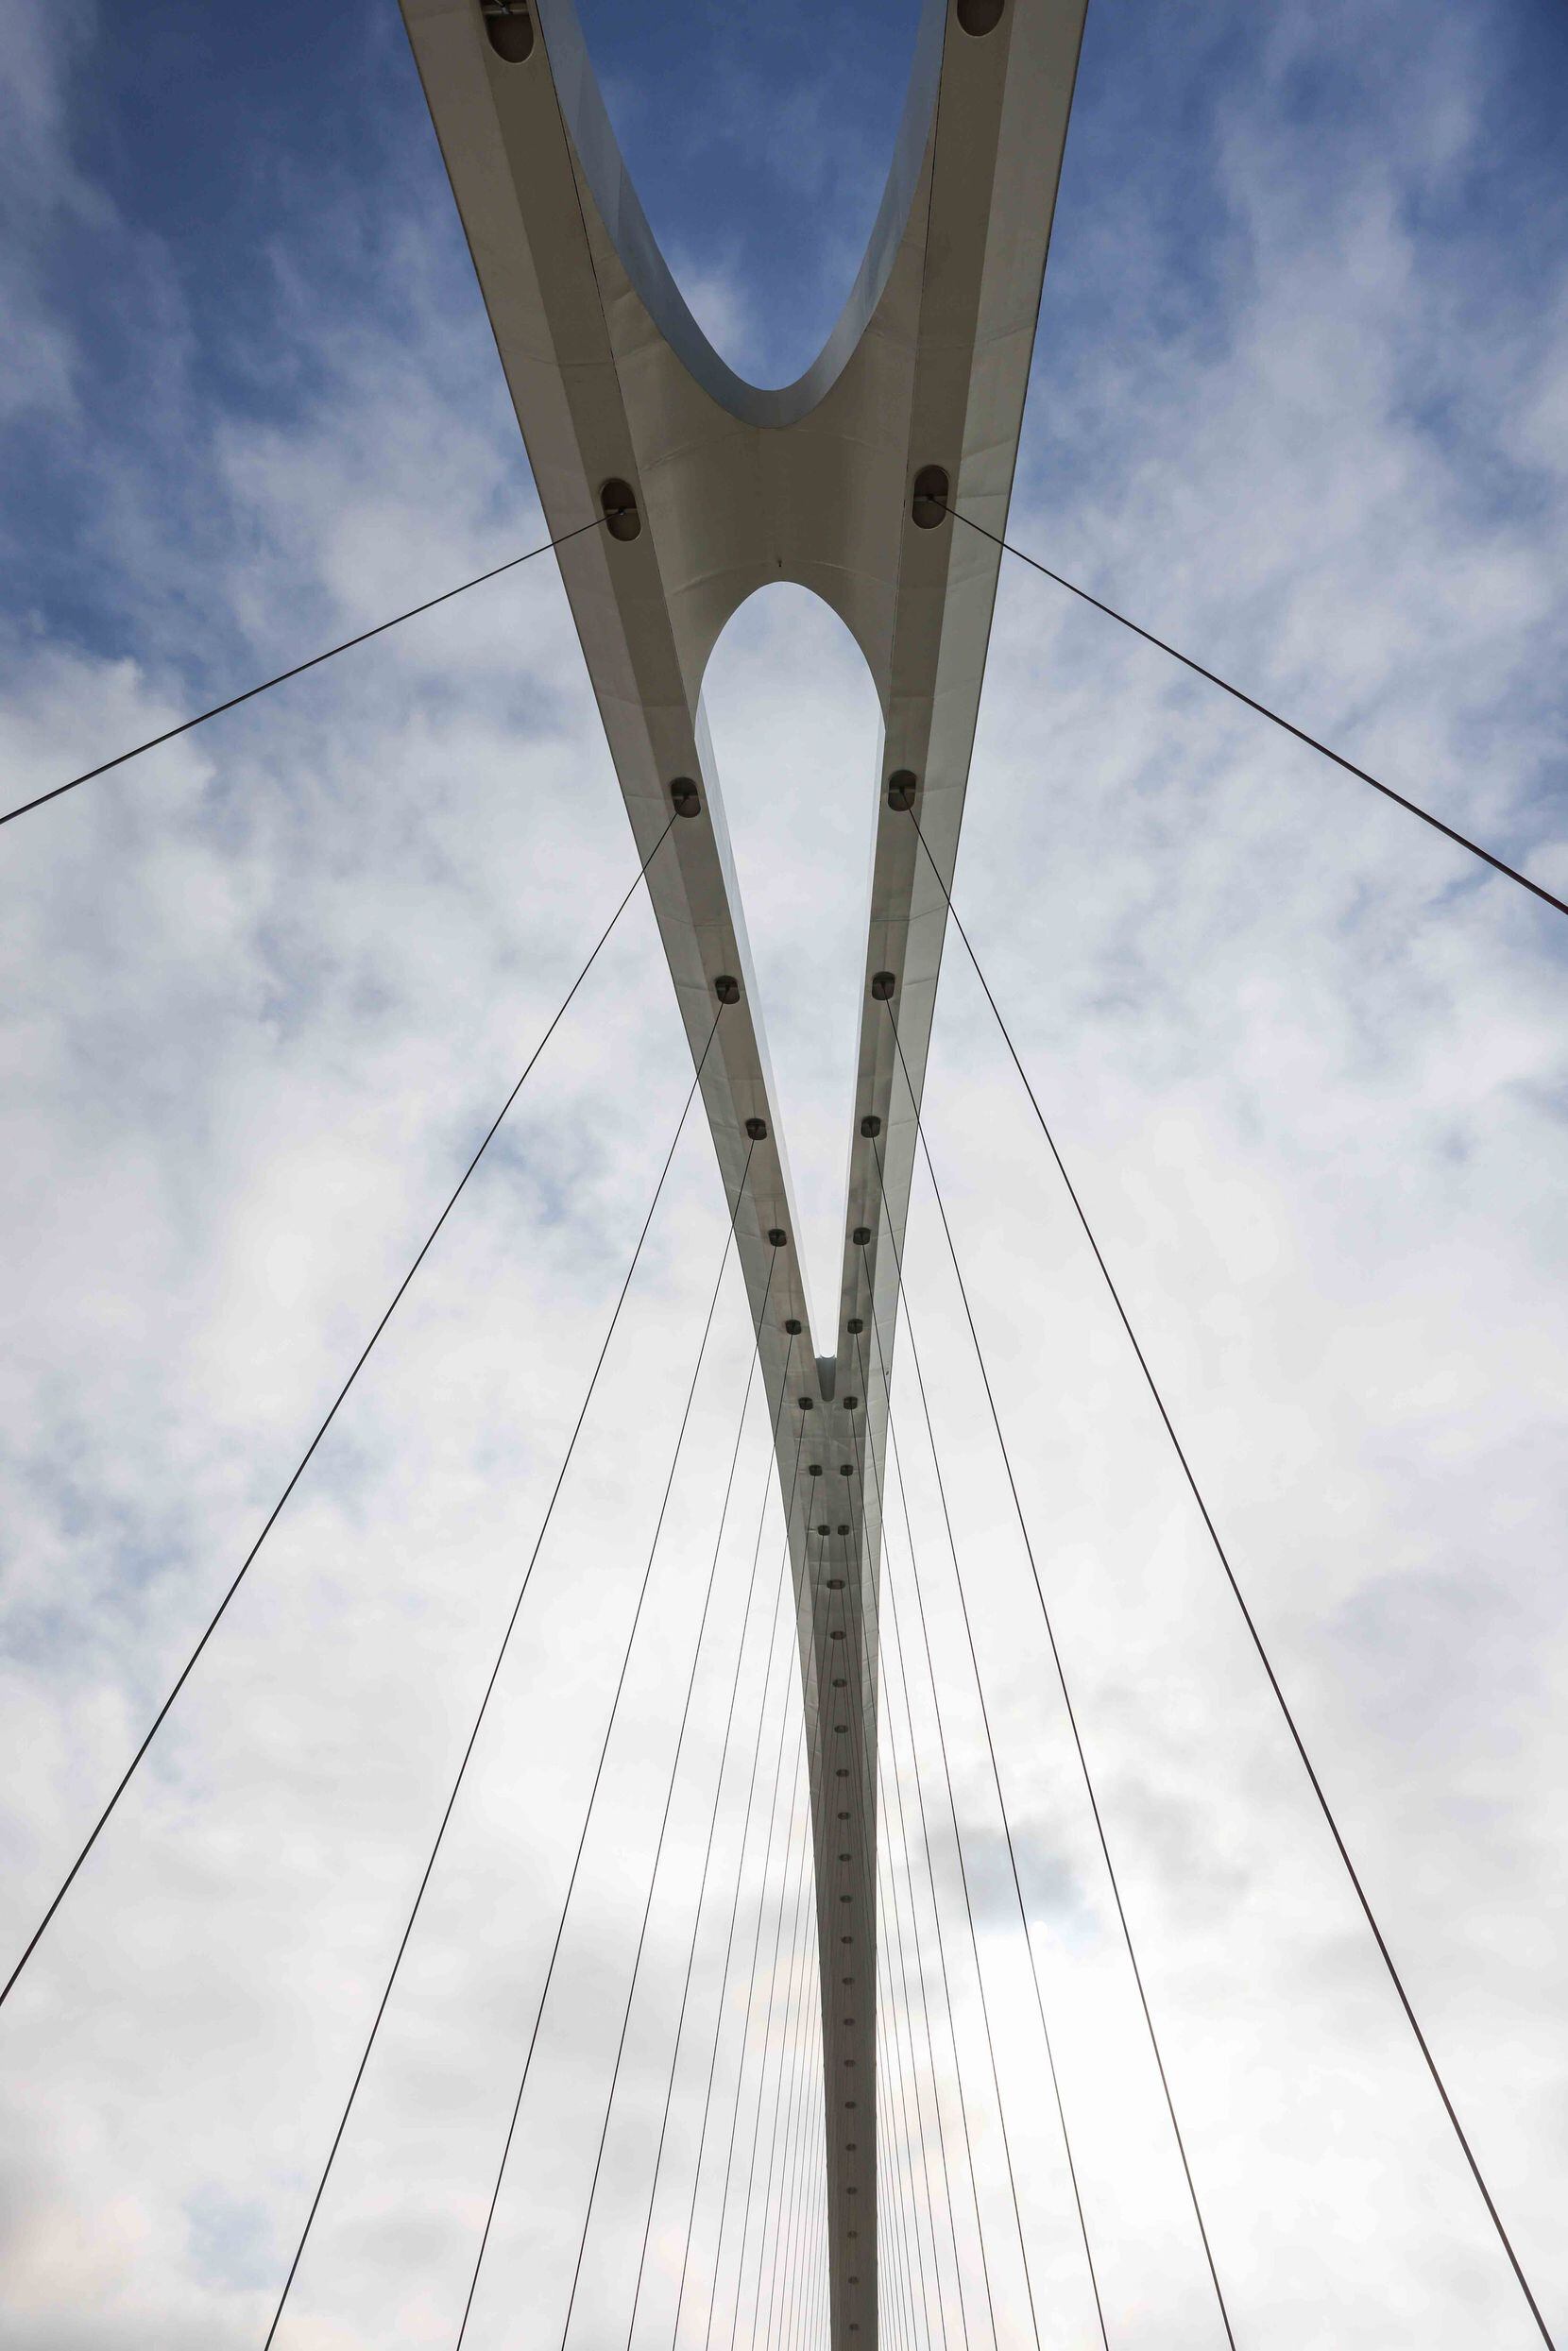 On June 10, city and county officials, residents and fitness enthusiasts celebrated the opening of the eastbound and westbound pedestrian and bicycle bridges of the Margaret McDermott Bridge with a ribbon-cutting. For several years, the bridge had been open only to vehicle traffic on I-30.